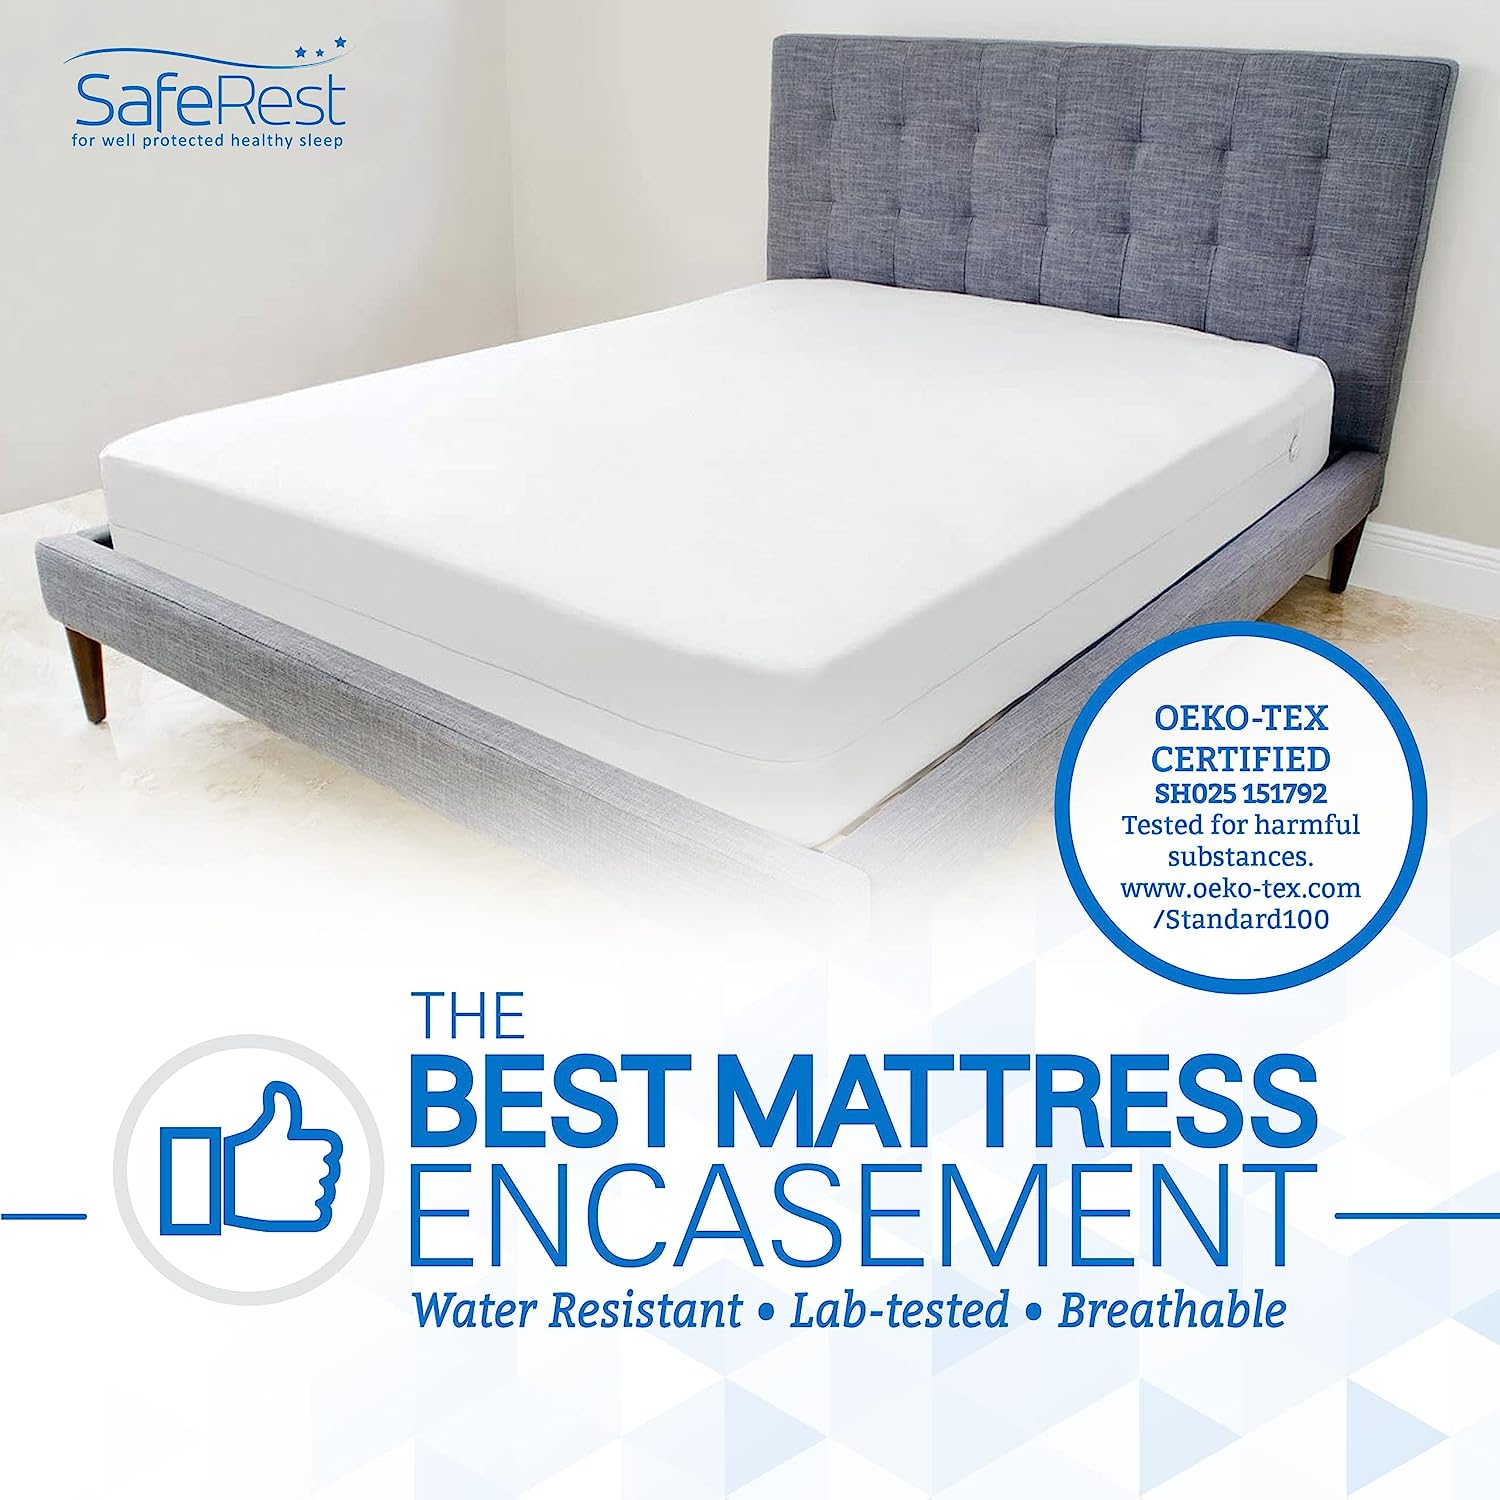 Saferest mattress encasement review of the benefits it can have for your mattress. 